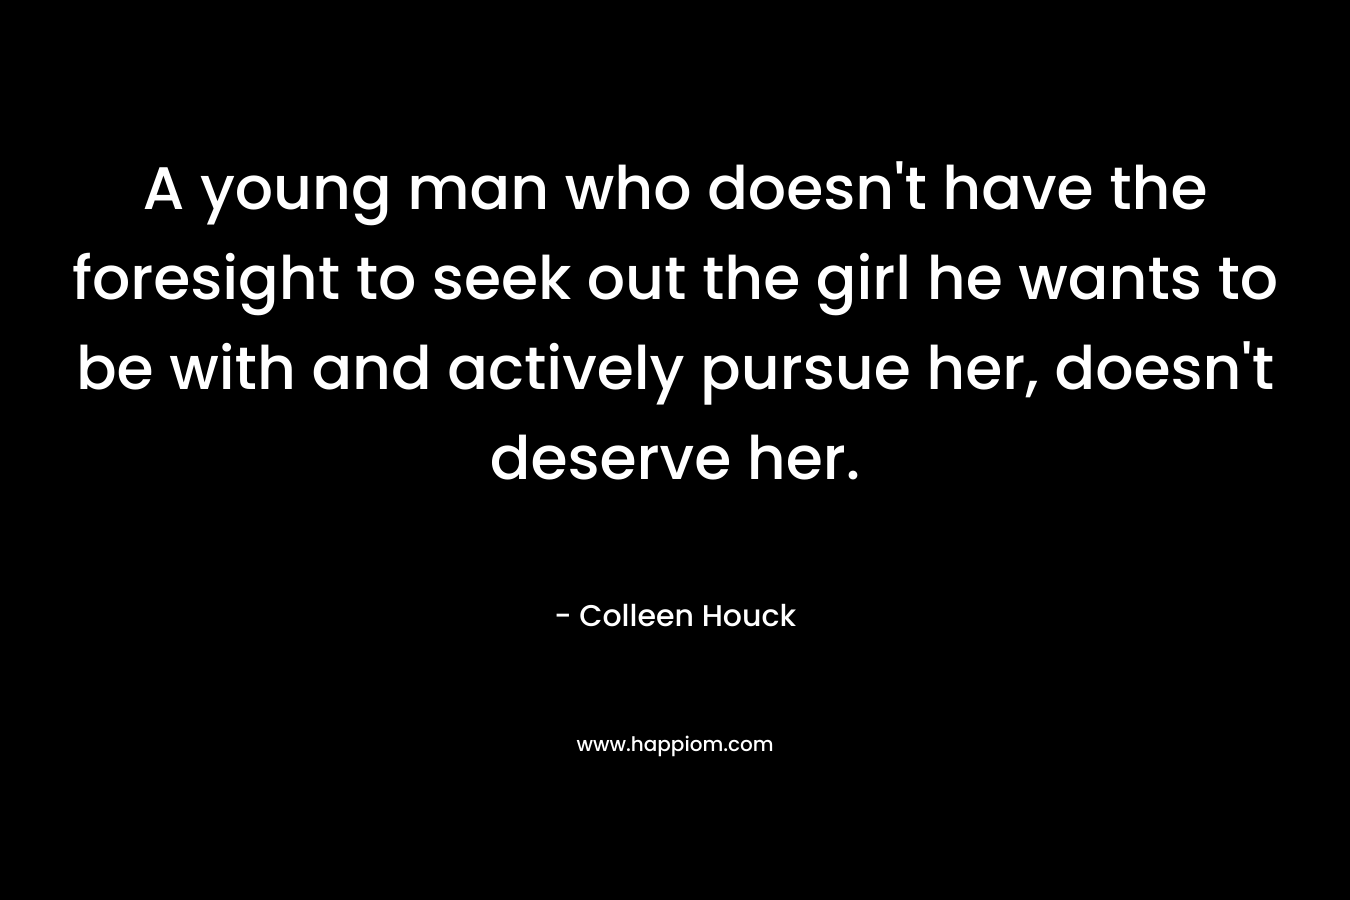 A young man who doesn’t have the foresight to seek out the girl he wants to be with and actively pursue her, doesn’t deserve her. – Colleen Houck